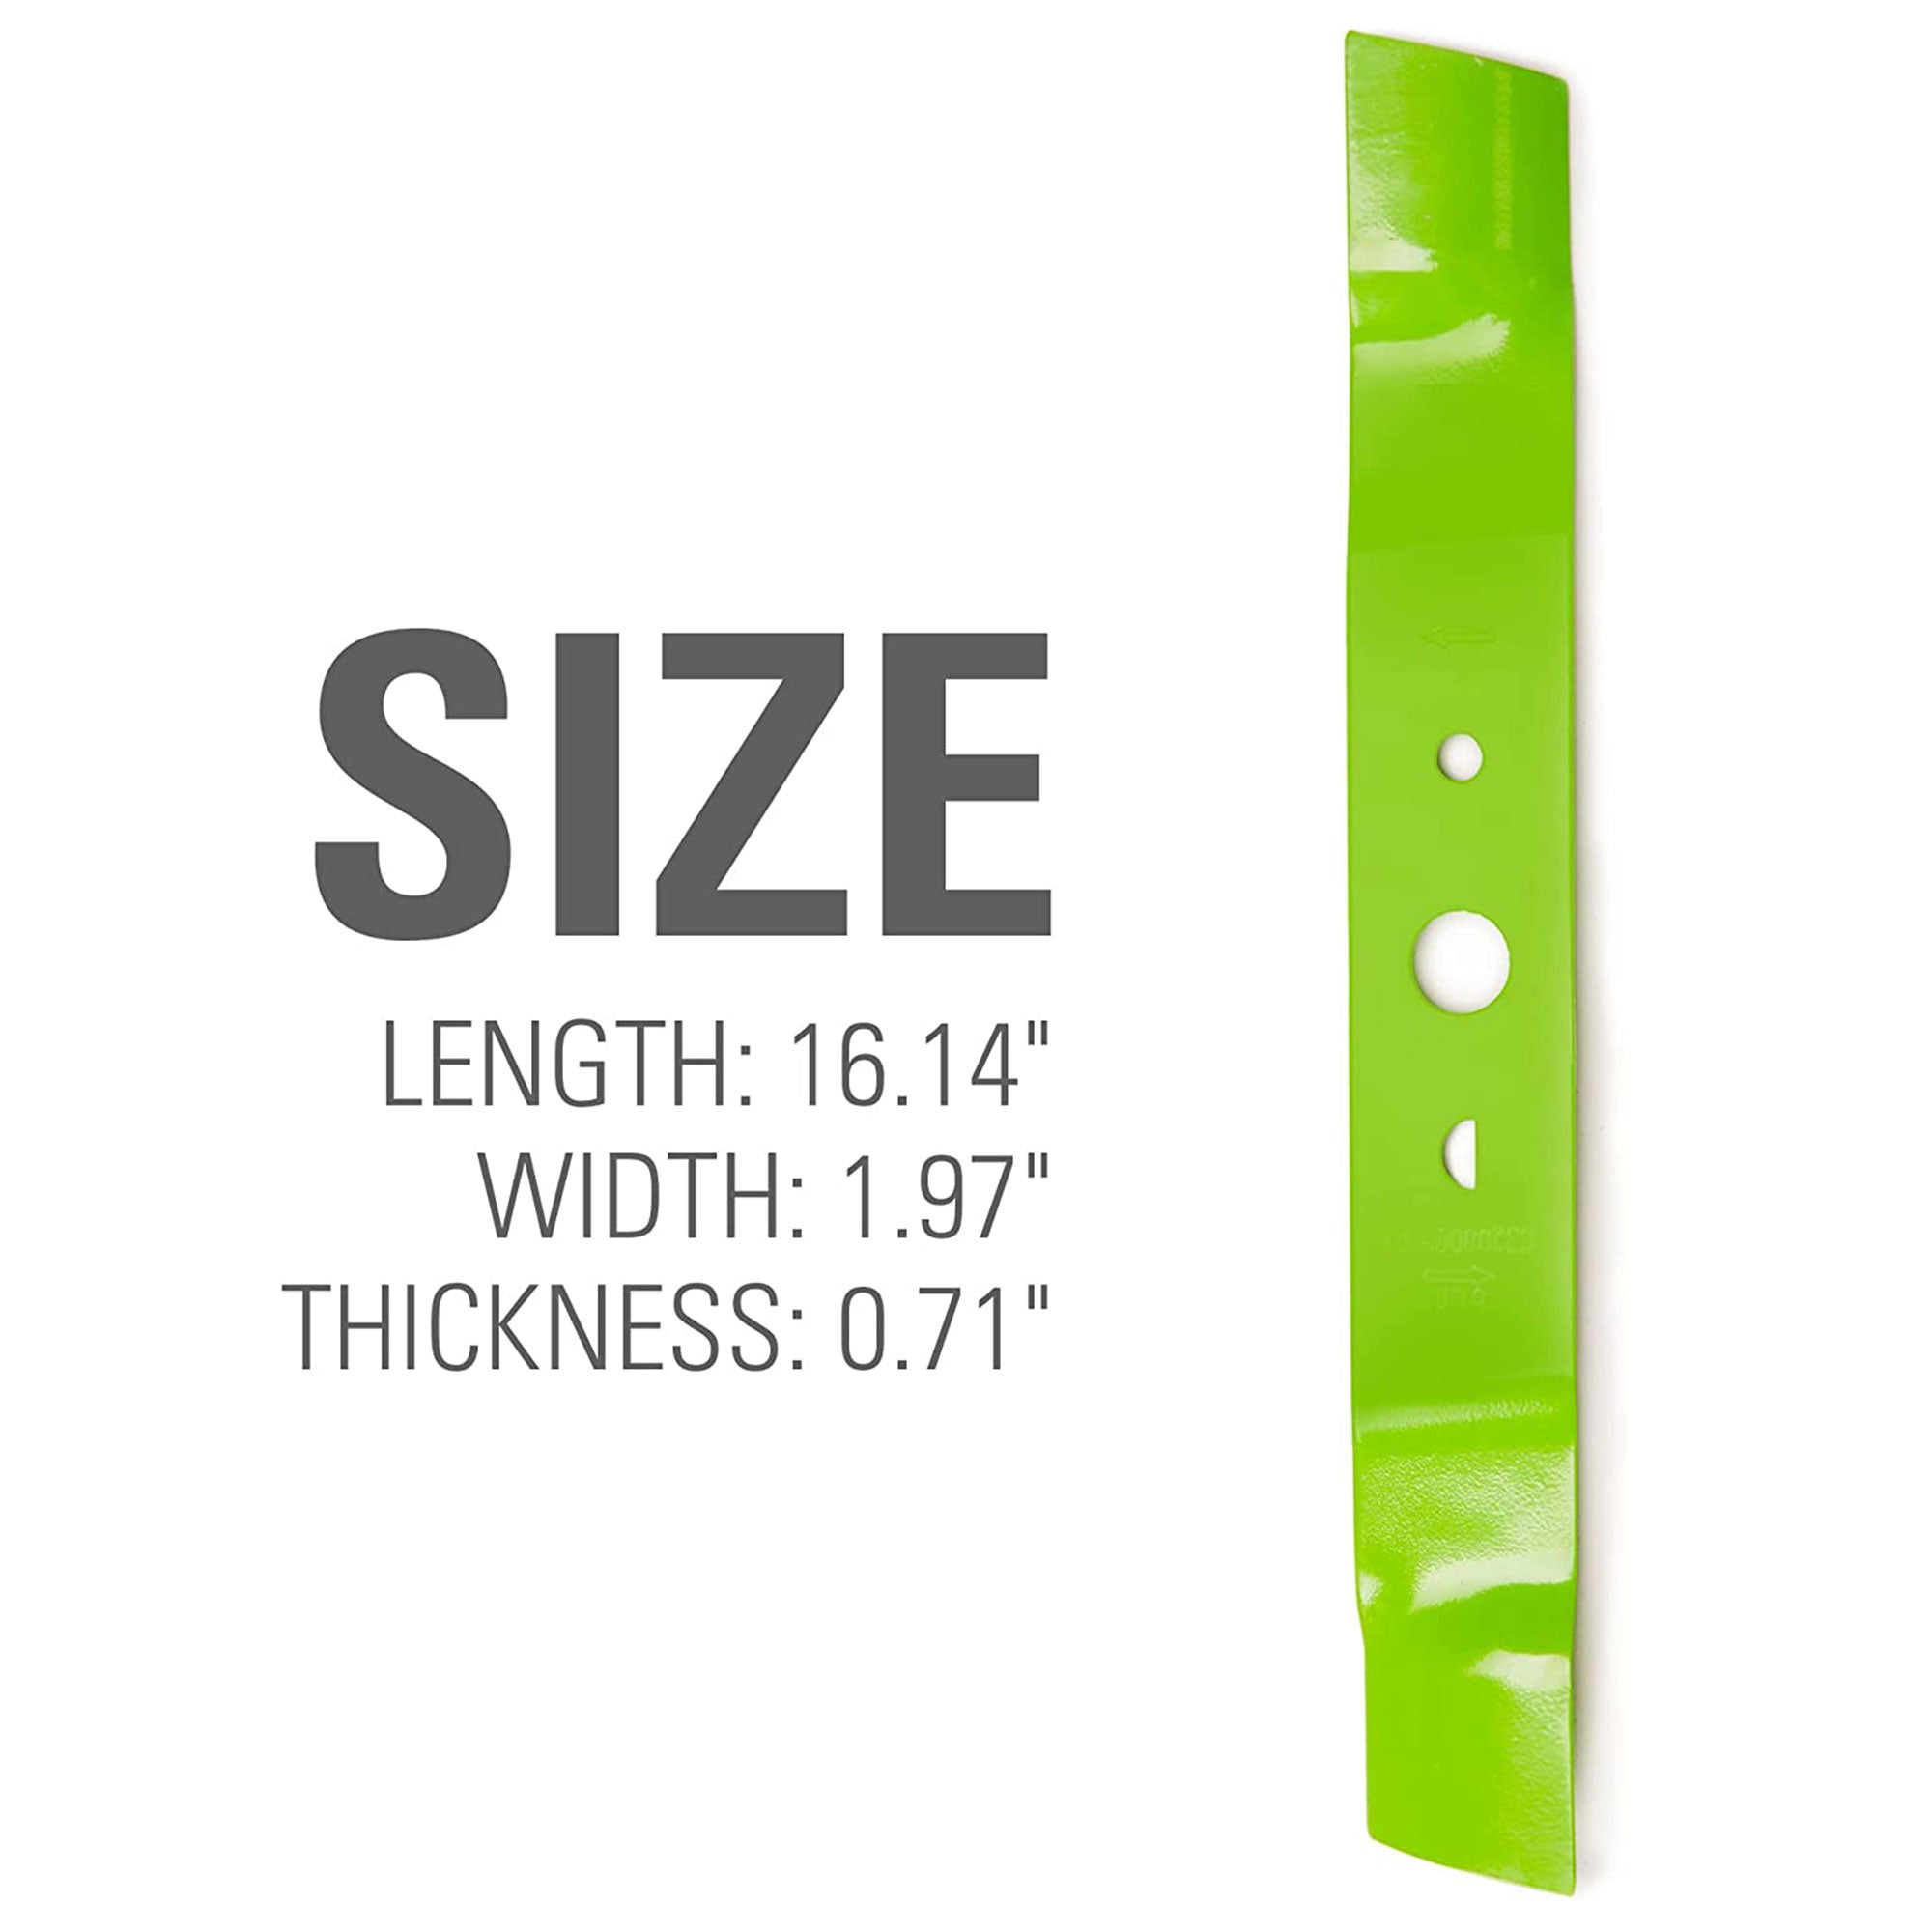 Replacement Blade for Select 17'' Greenworks Lawn Mowers